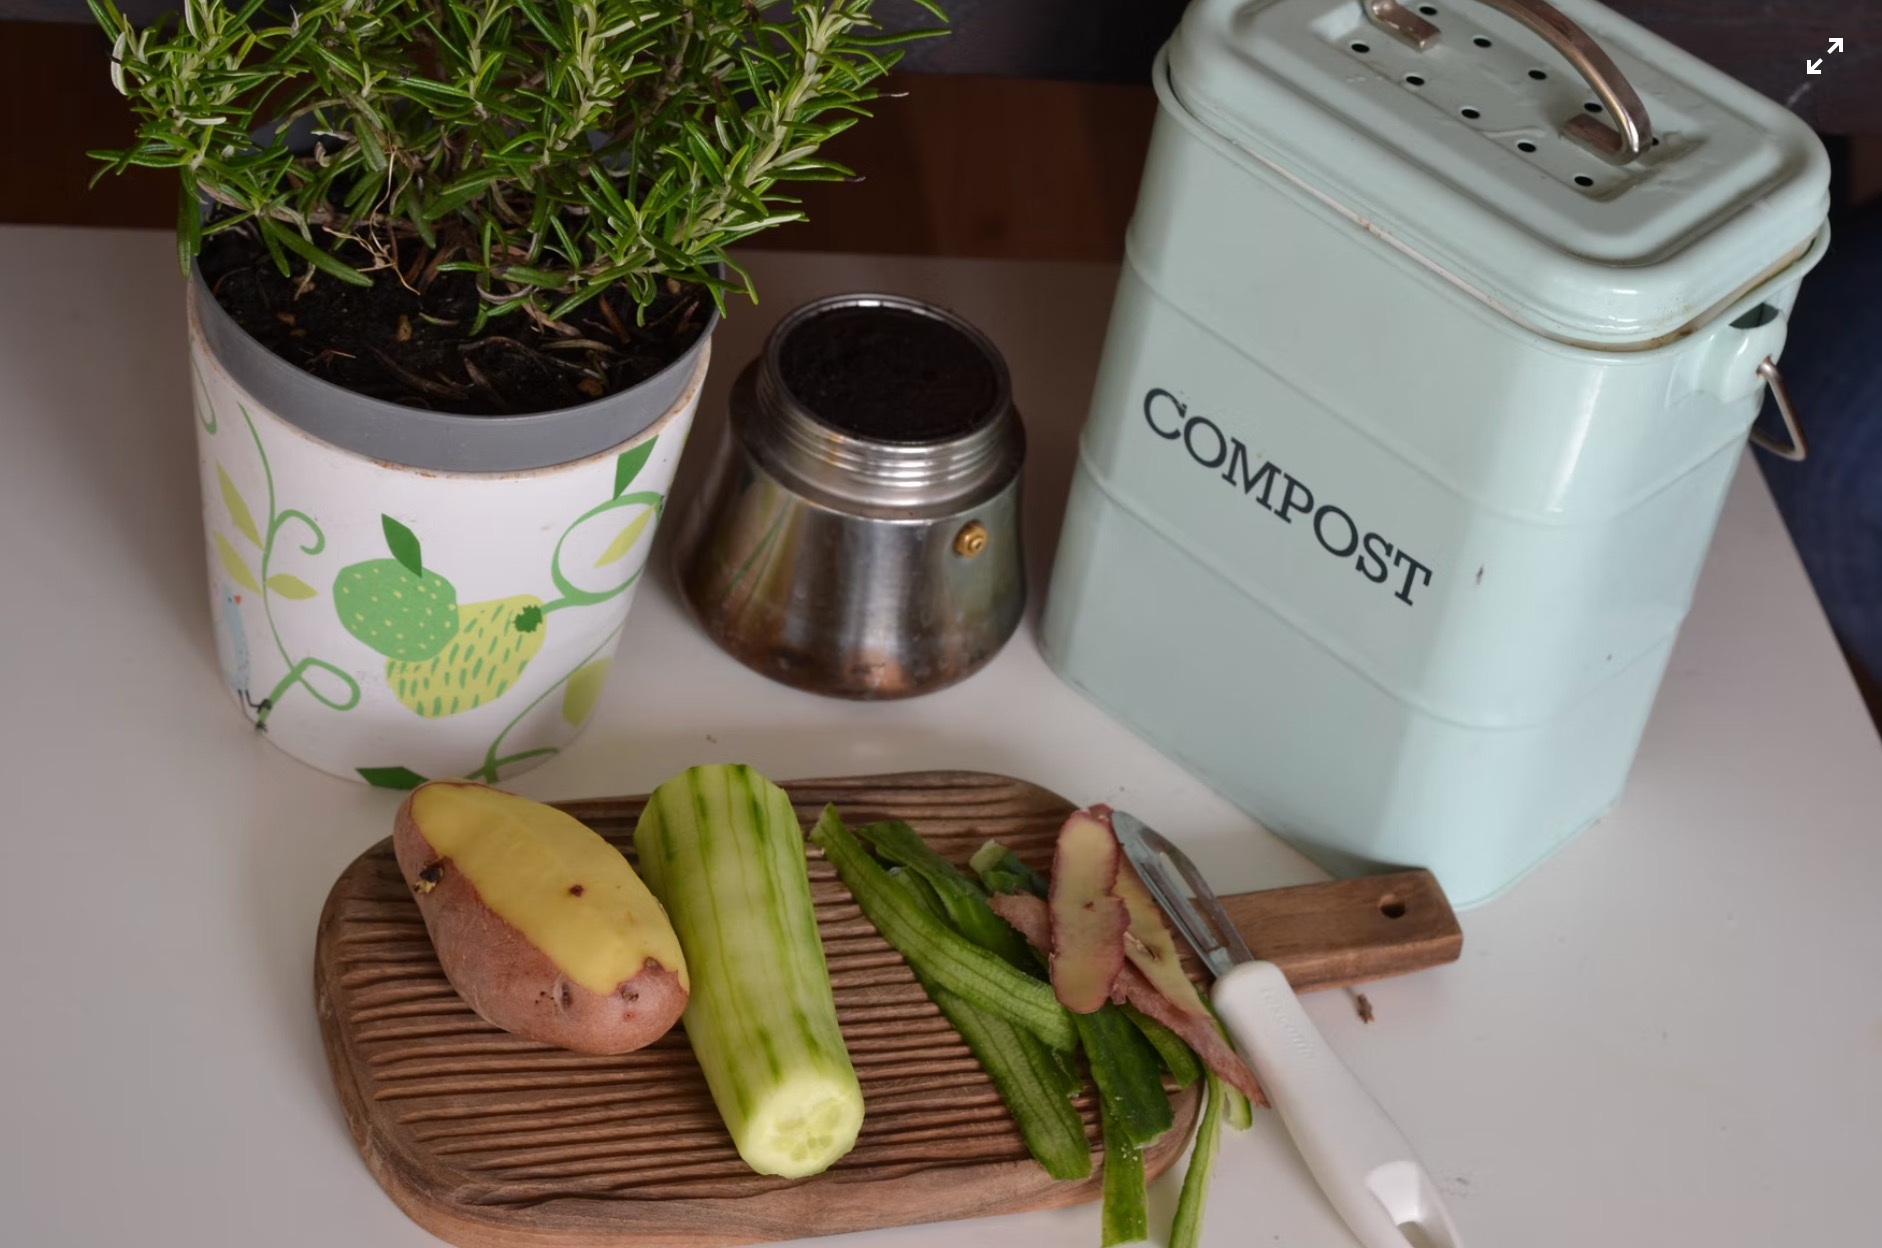 Are you composting your household waste?